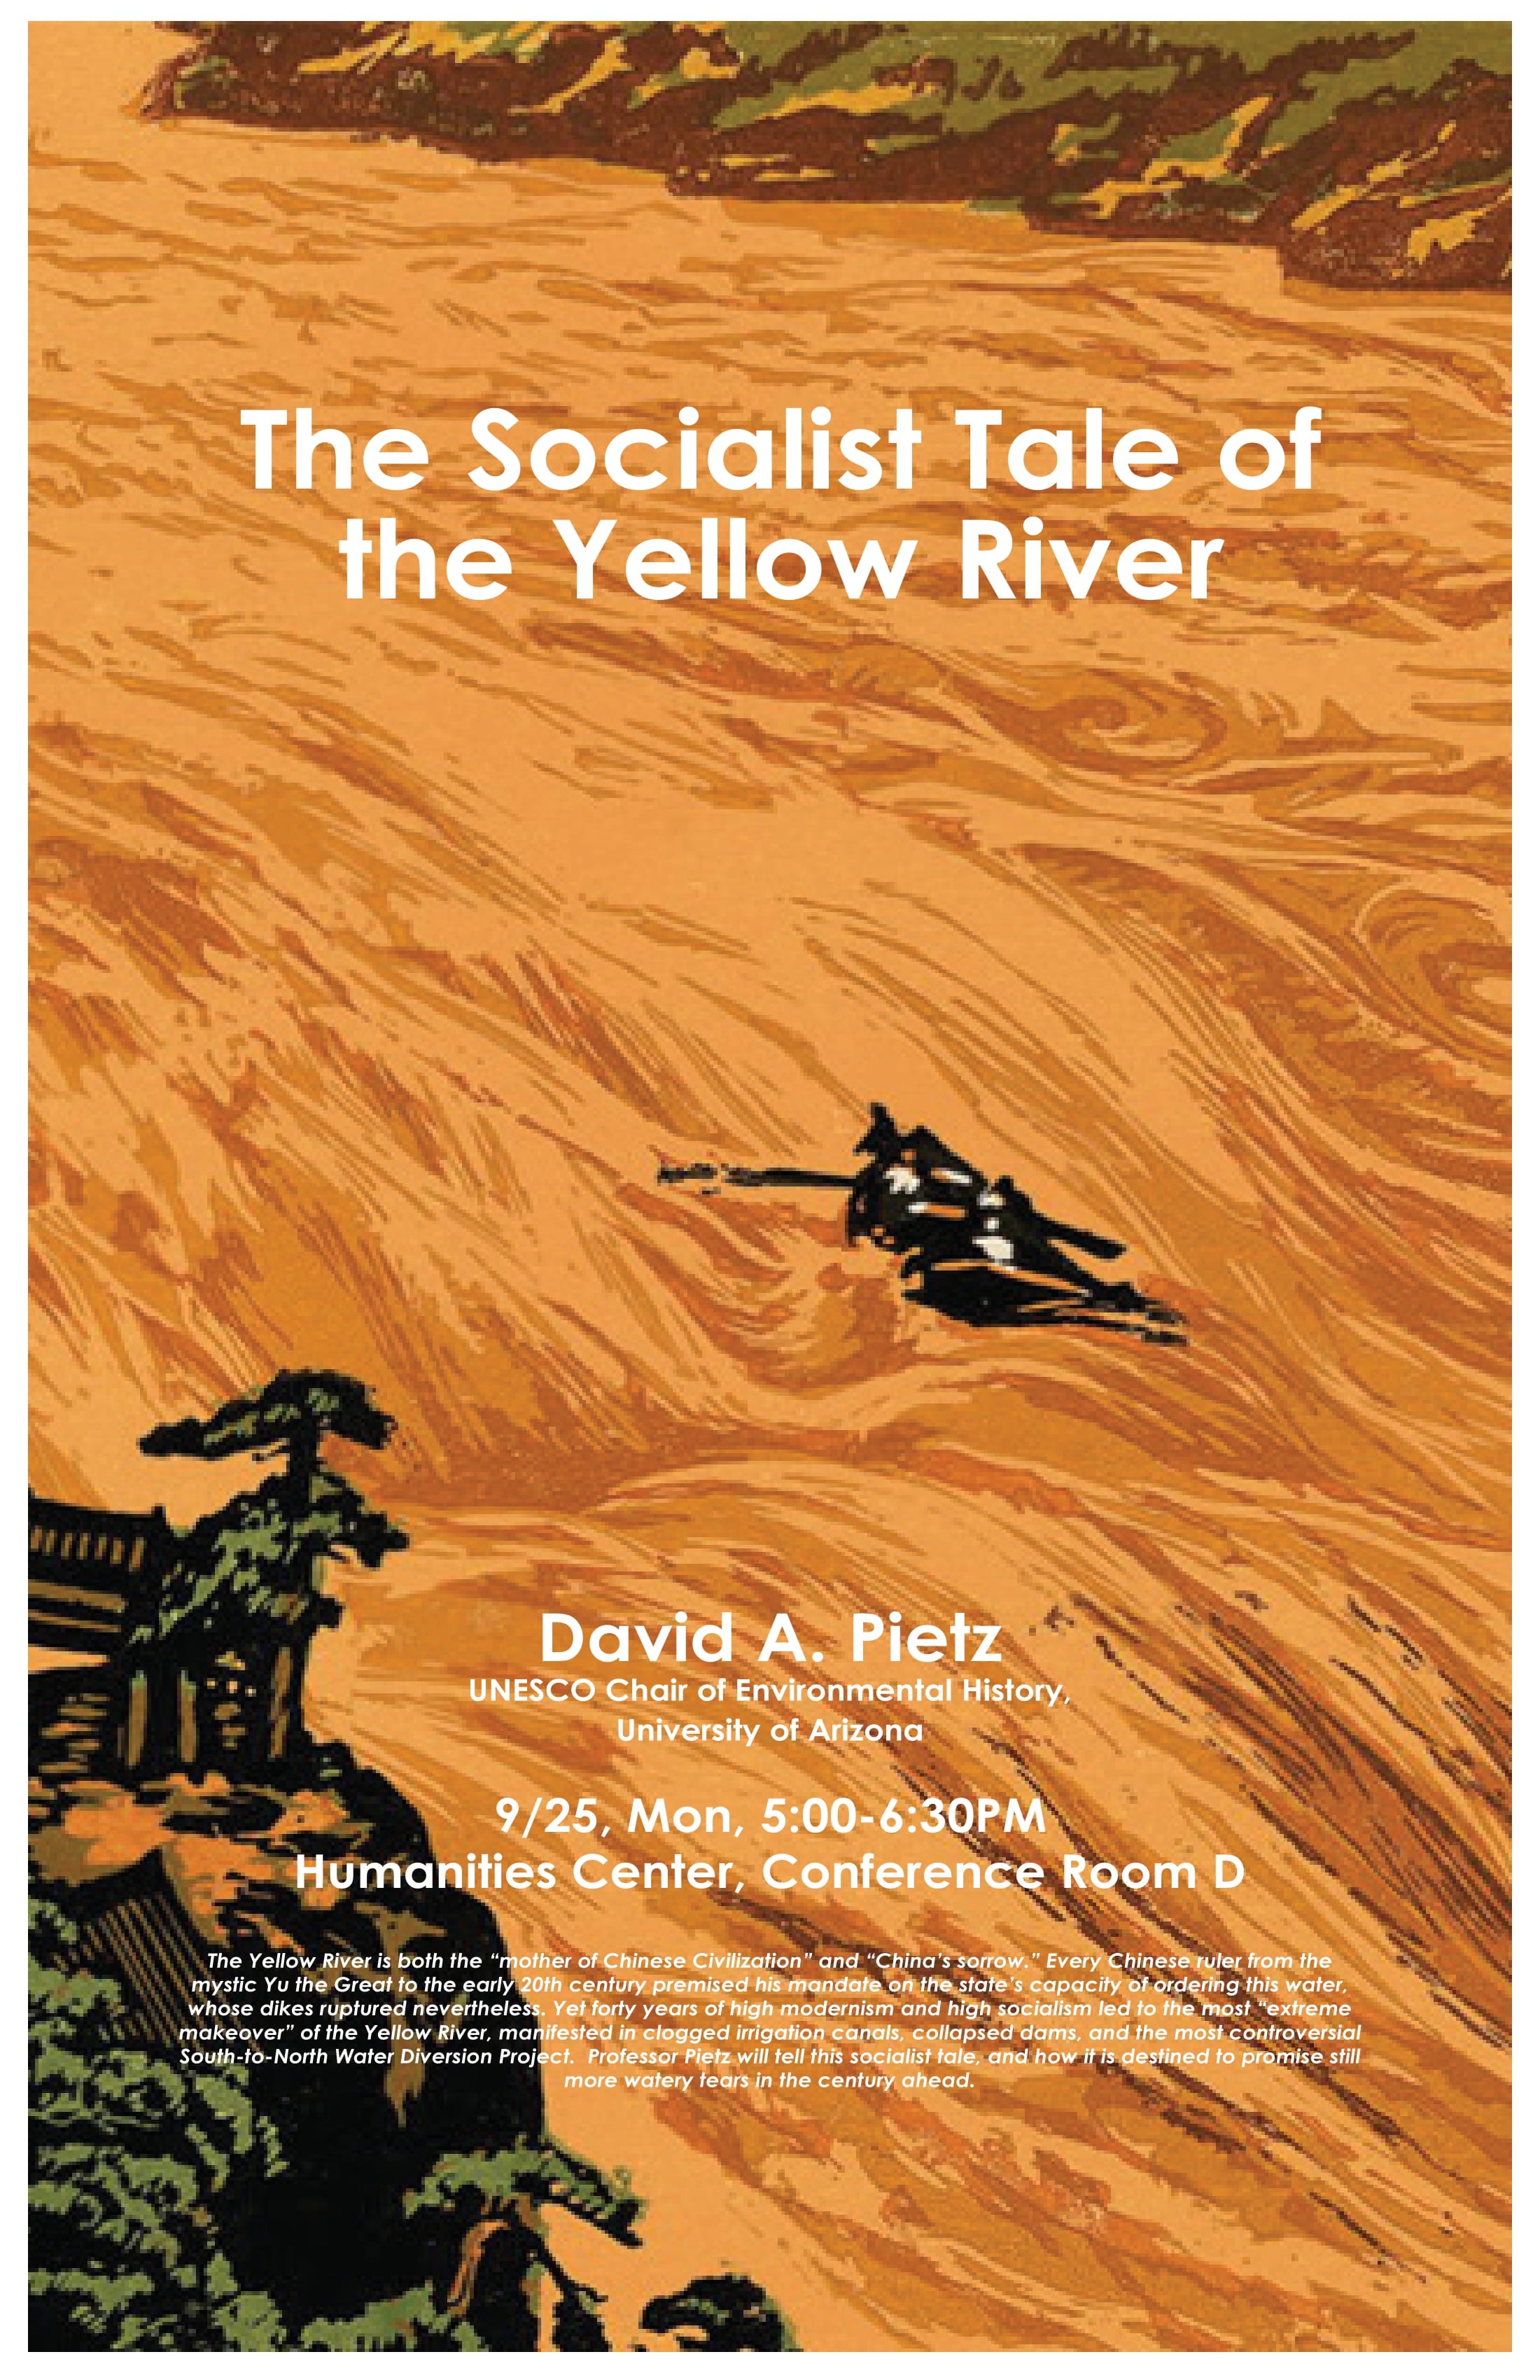 The Socialist Tale of the Yellow River